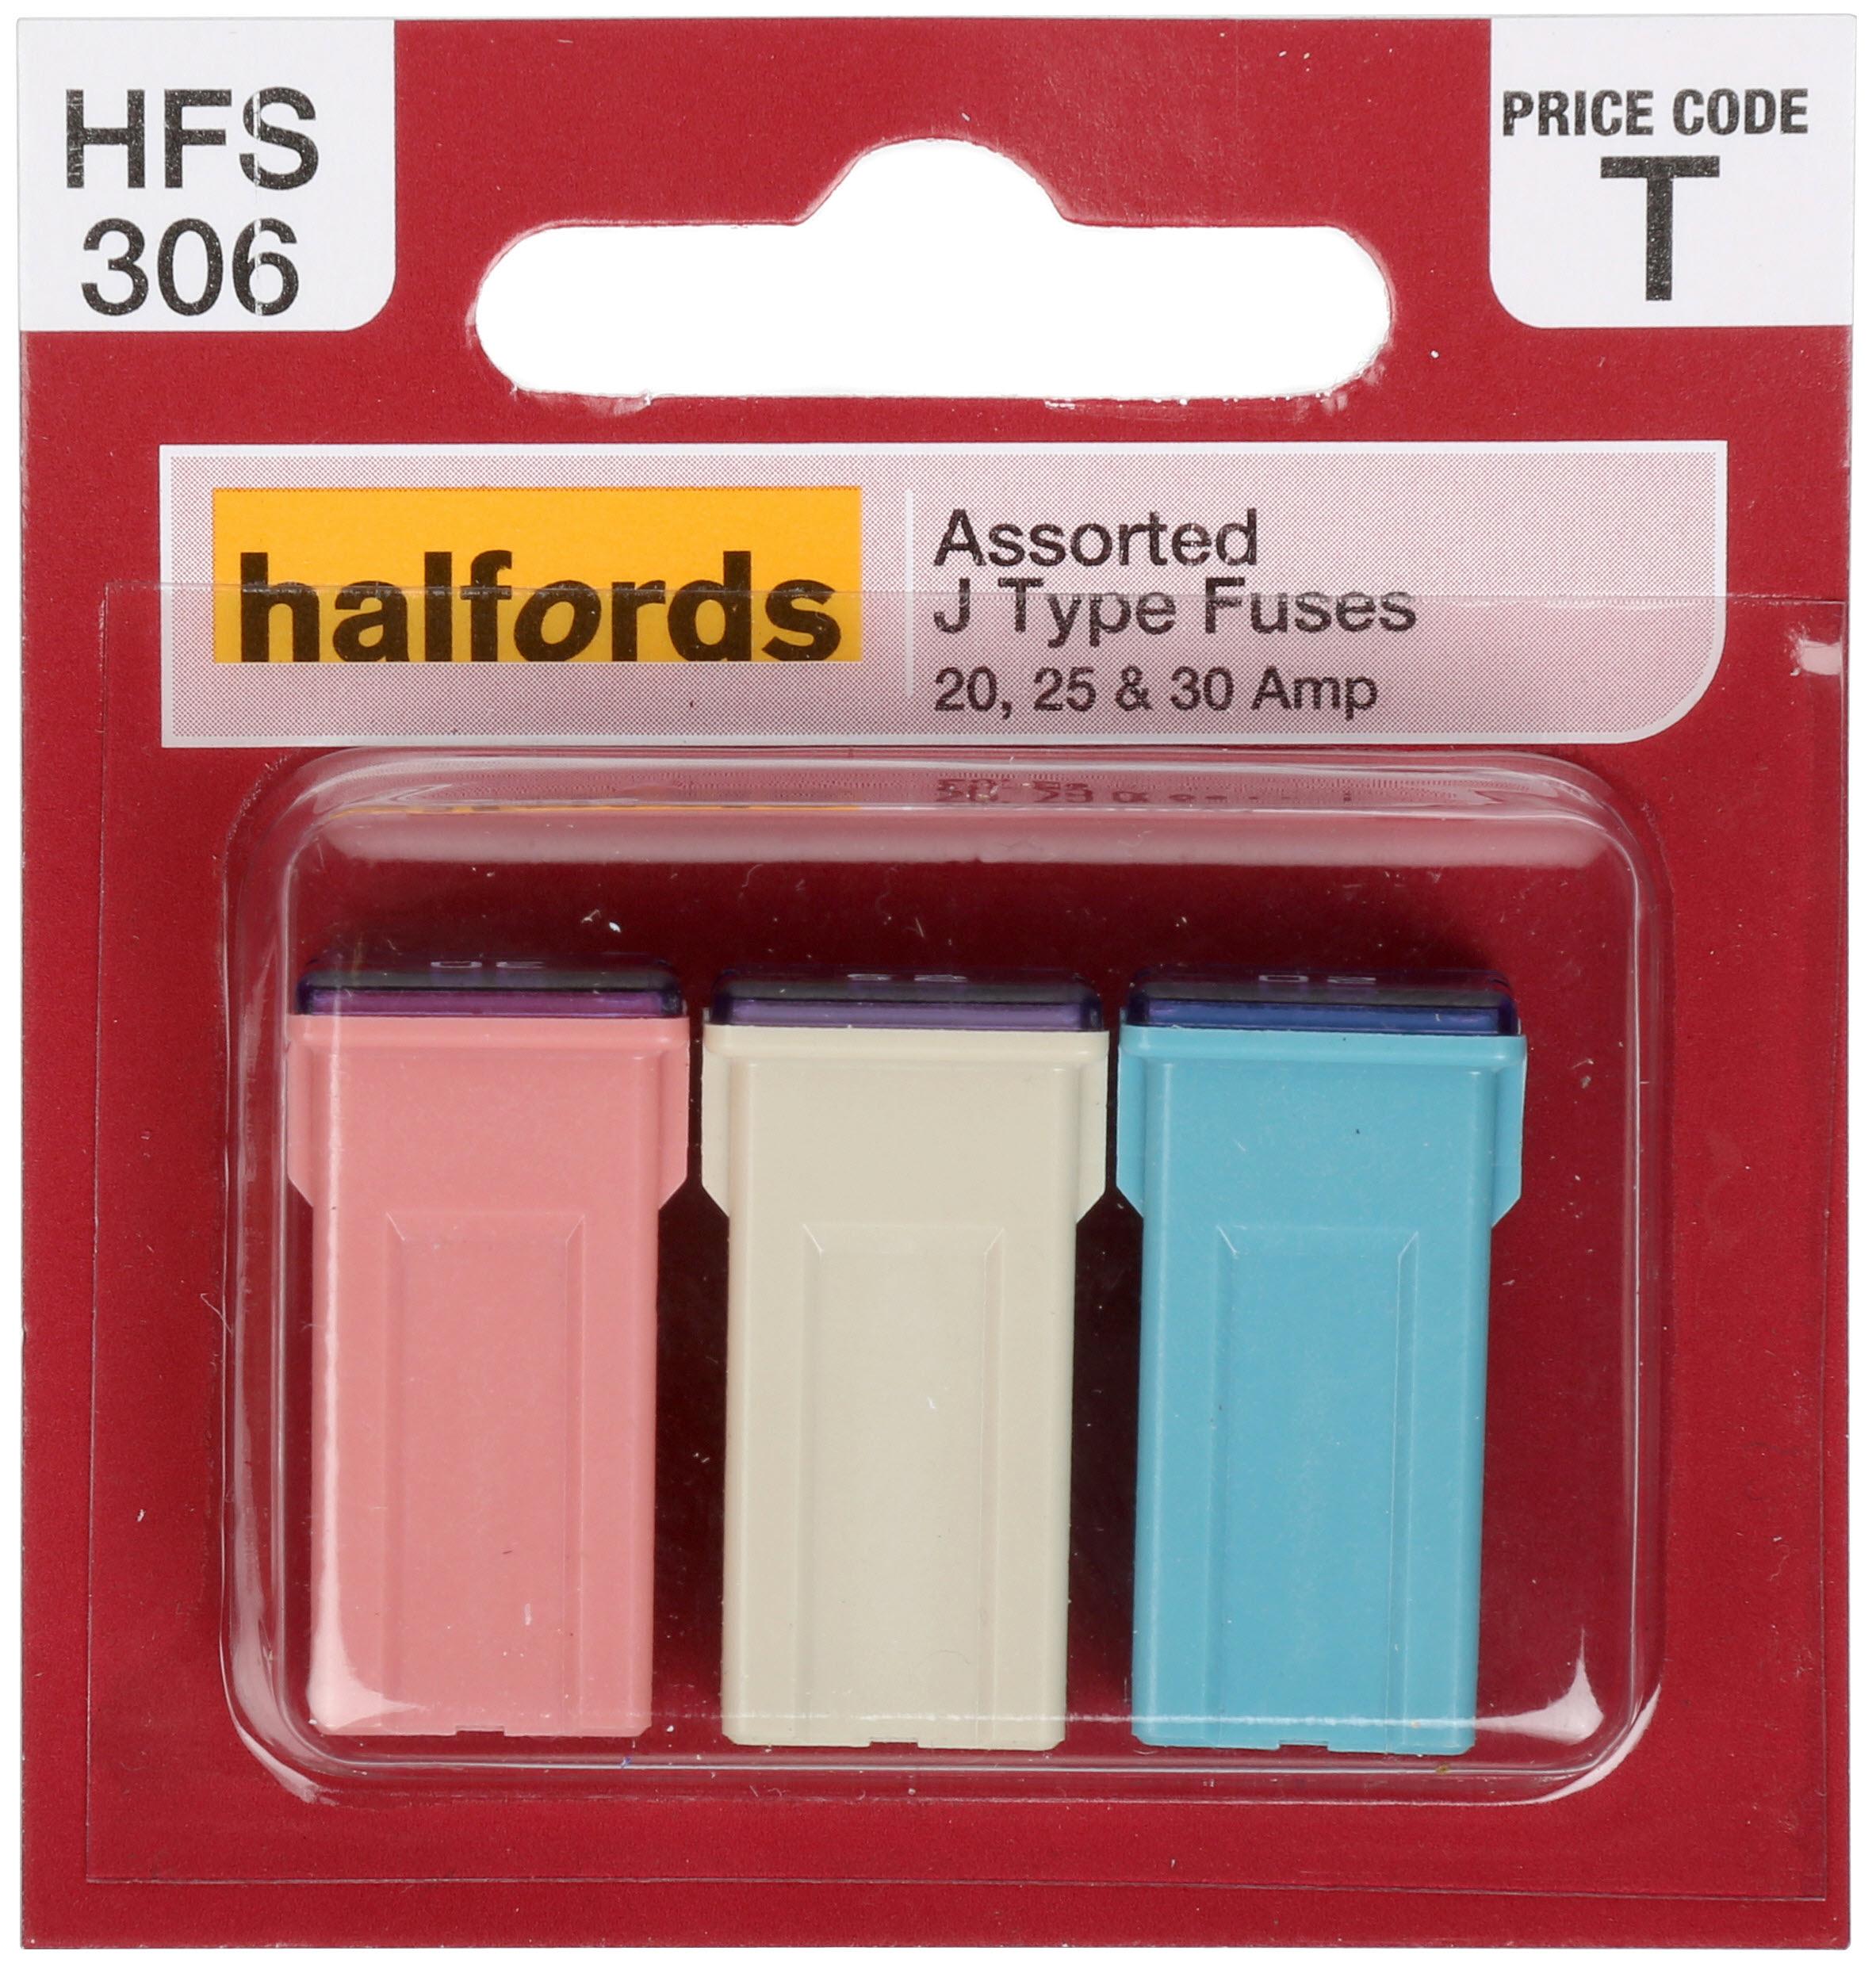 Halfords Assorted J Type Fuses 20,25 & 30 Amp